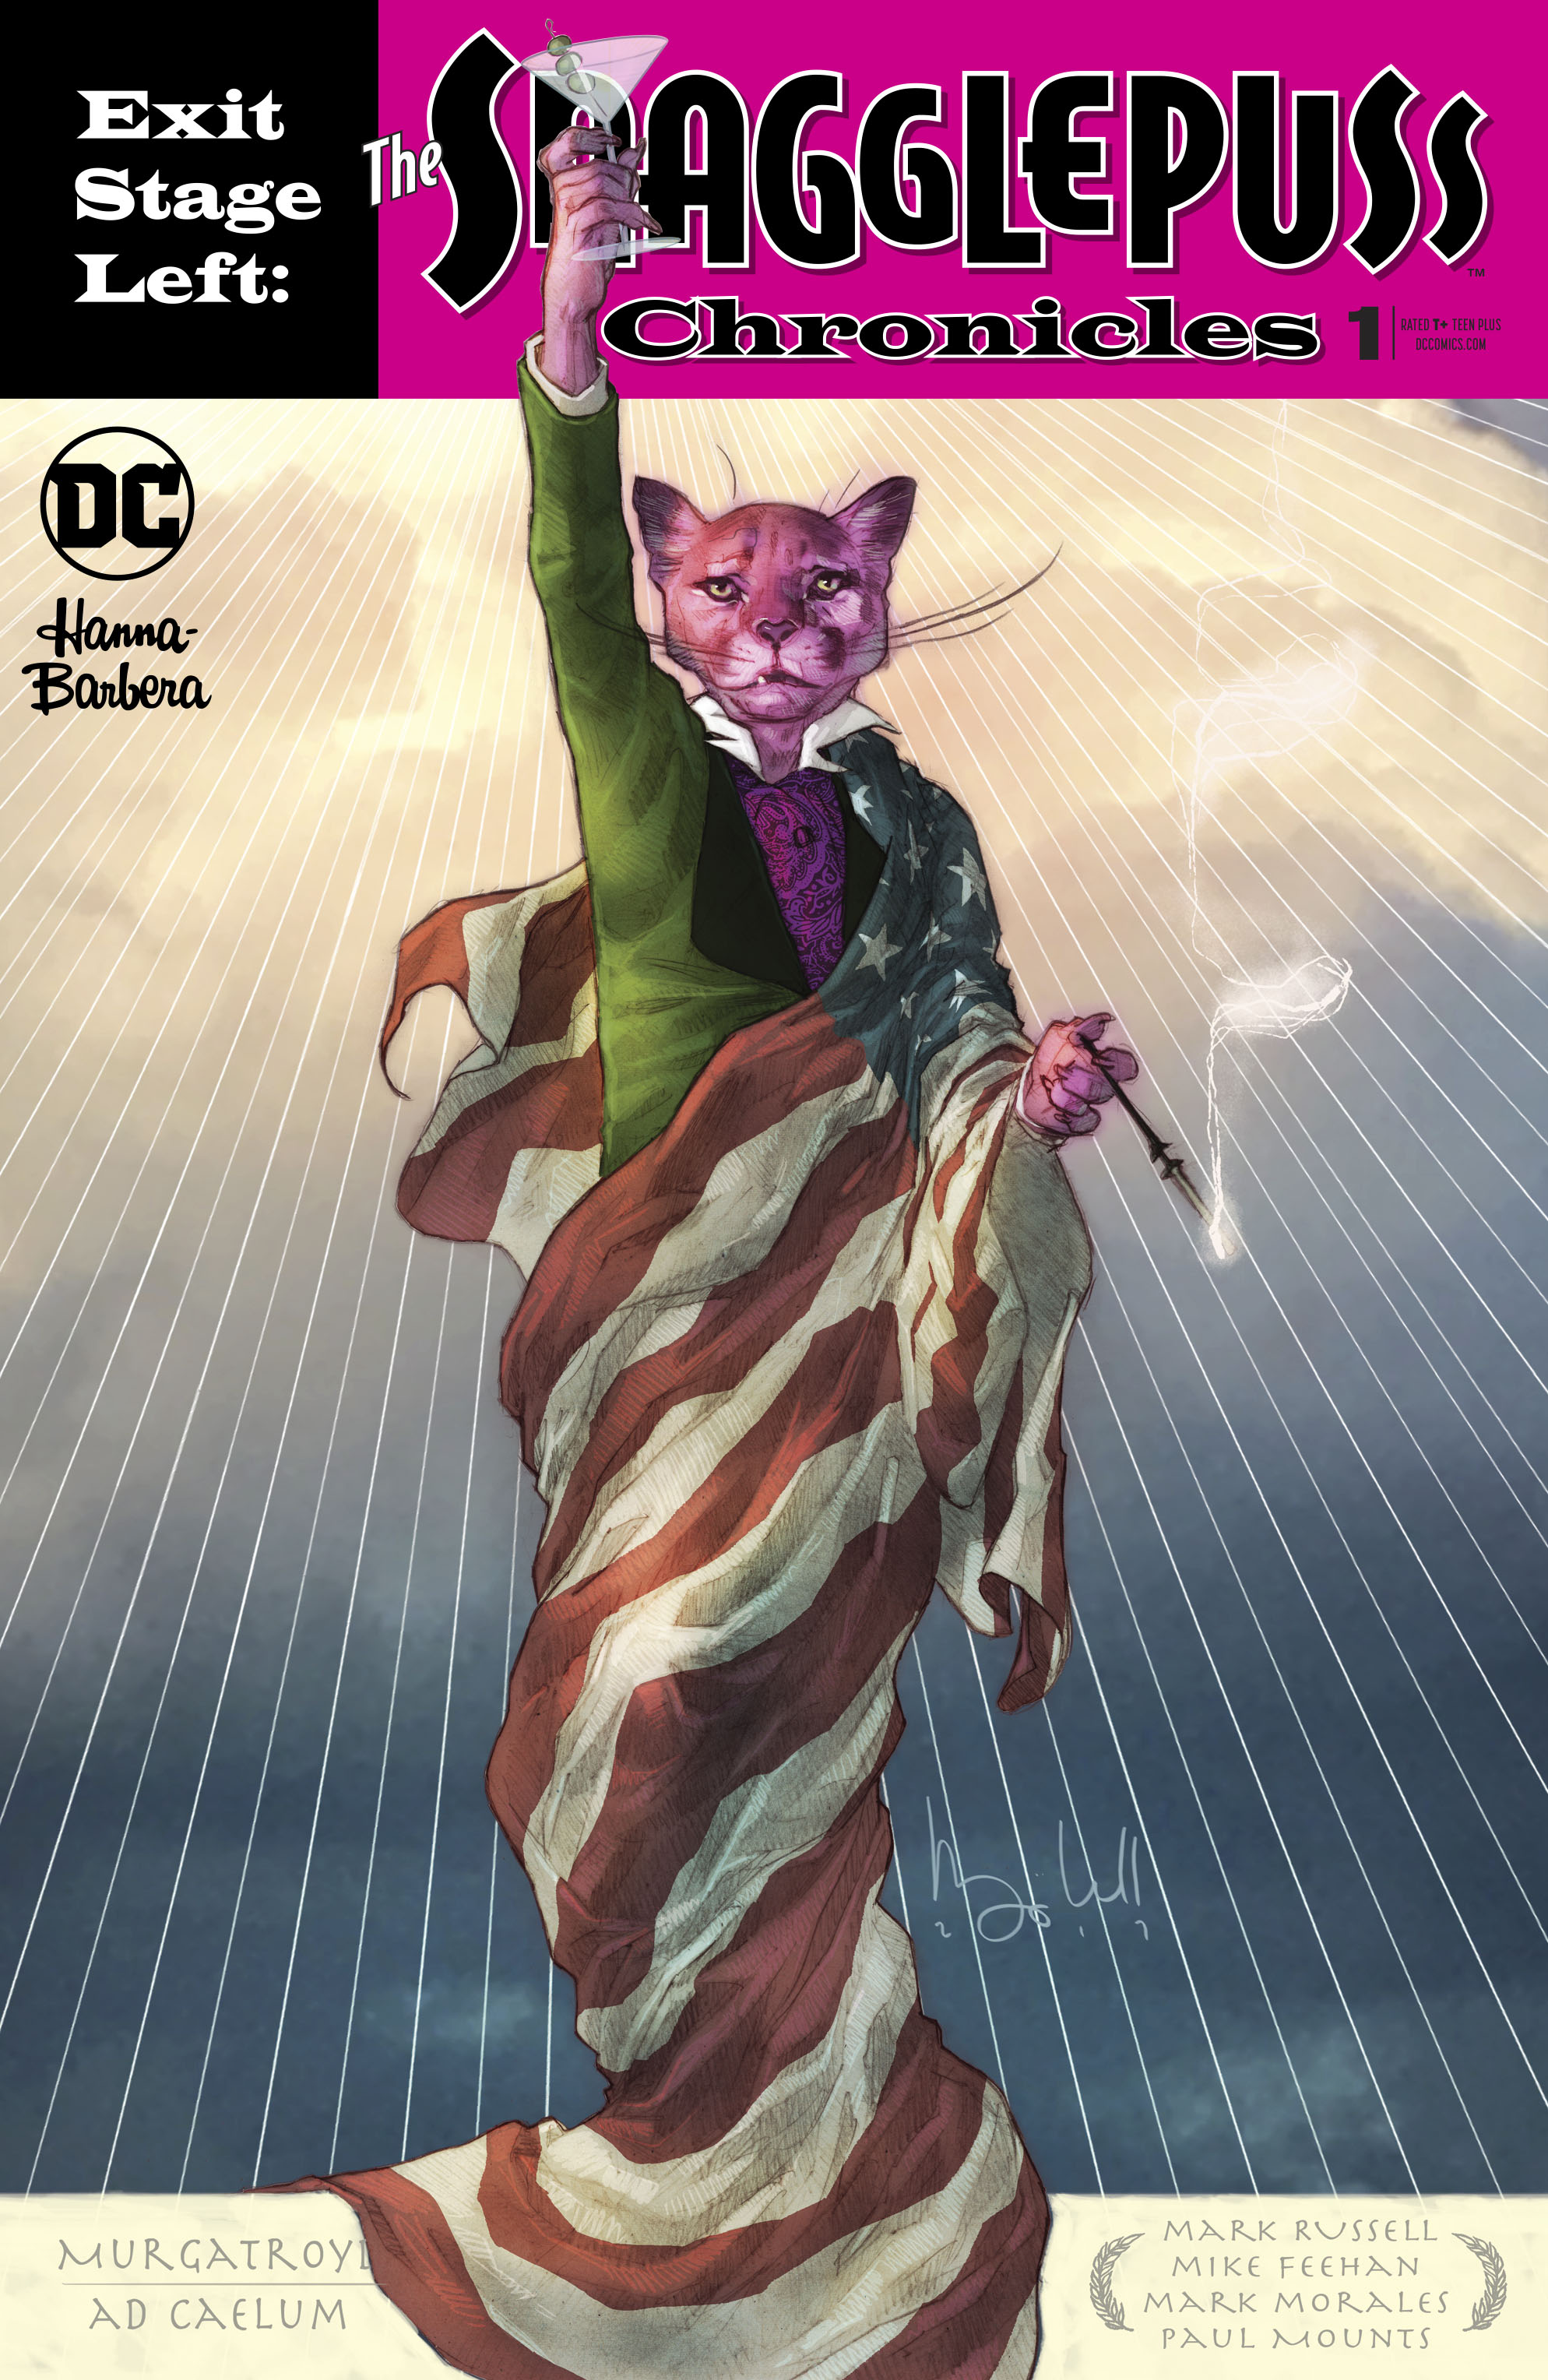 Exit Stage Left: The Snagglepuss Chronicles (2018-): Chapter 1 - Page 1